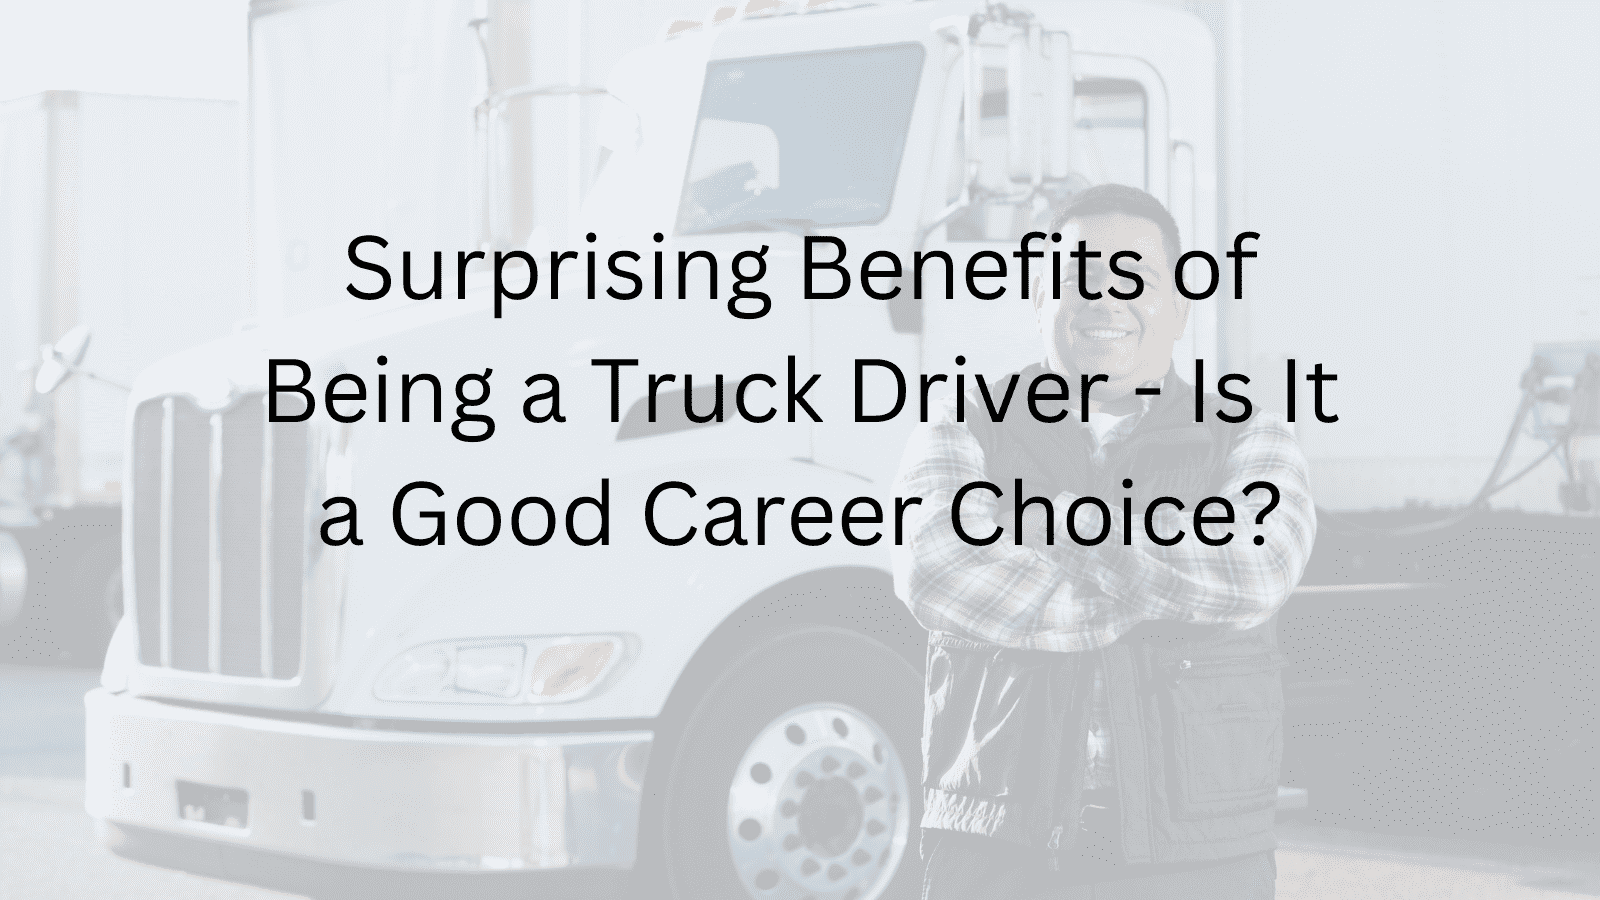 https://intercitylines.com/wp-content/uploads/2022/12/Surprising-Benefits-of-Being-a-Truck-Driver.png